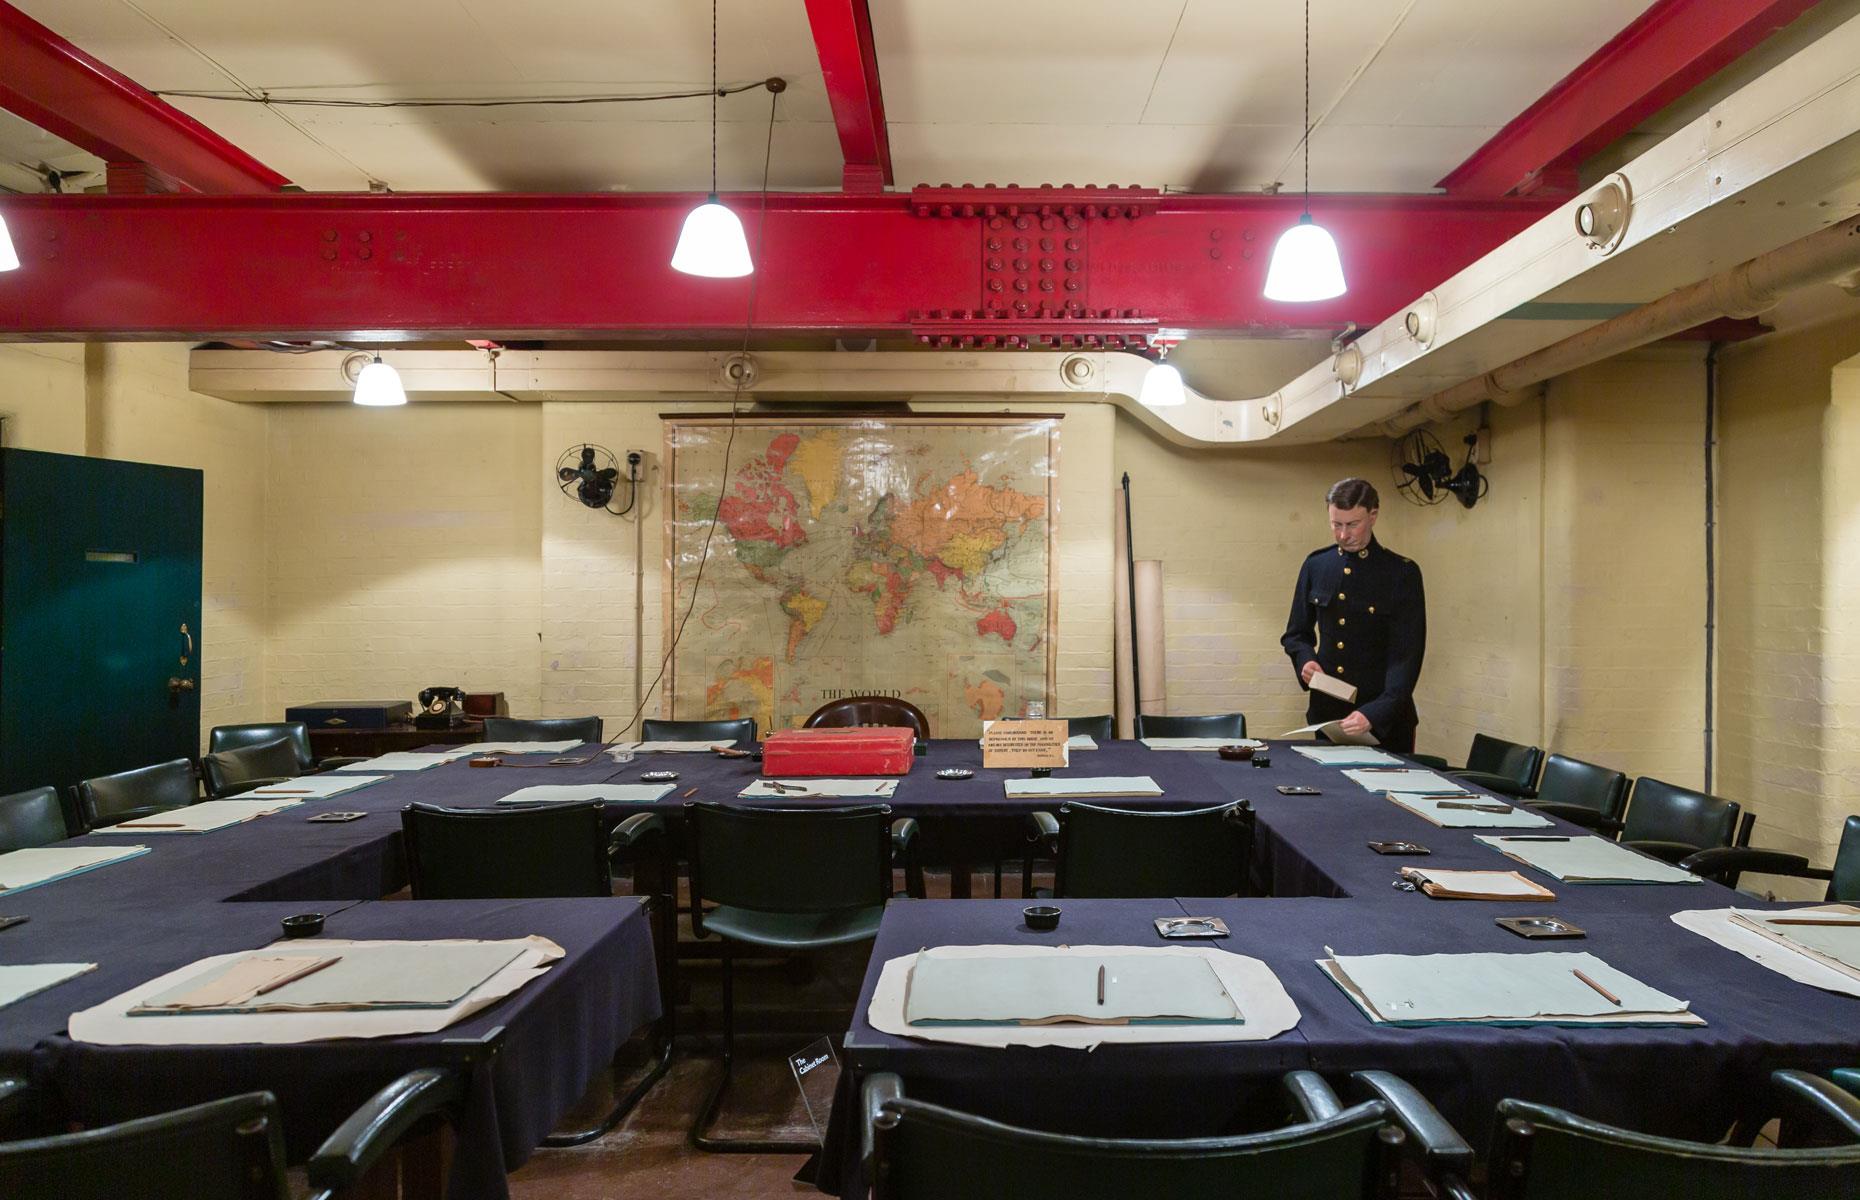 <p>The complex has been preserved since the end of its use, following the cessation of Germany's bombing raids on London in 1945.</p>  <p>Upon entering the Cabinet Room, the cigar-smoking Allied leader declared: “This is the room from which I will direct the war.” And he wasn't wrong. Churchill's War Cabinet met there a total of 115 times to discuss everything from the Dunkirk evacuations to the Pearl Harbor attacks, with the space most frequented during the Blitz and V-1 flying bomb attacks.</p>